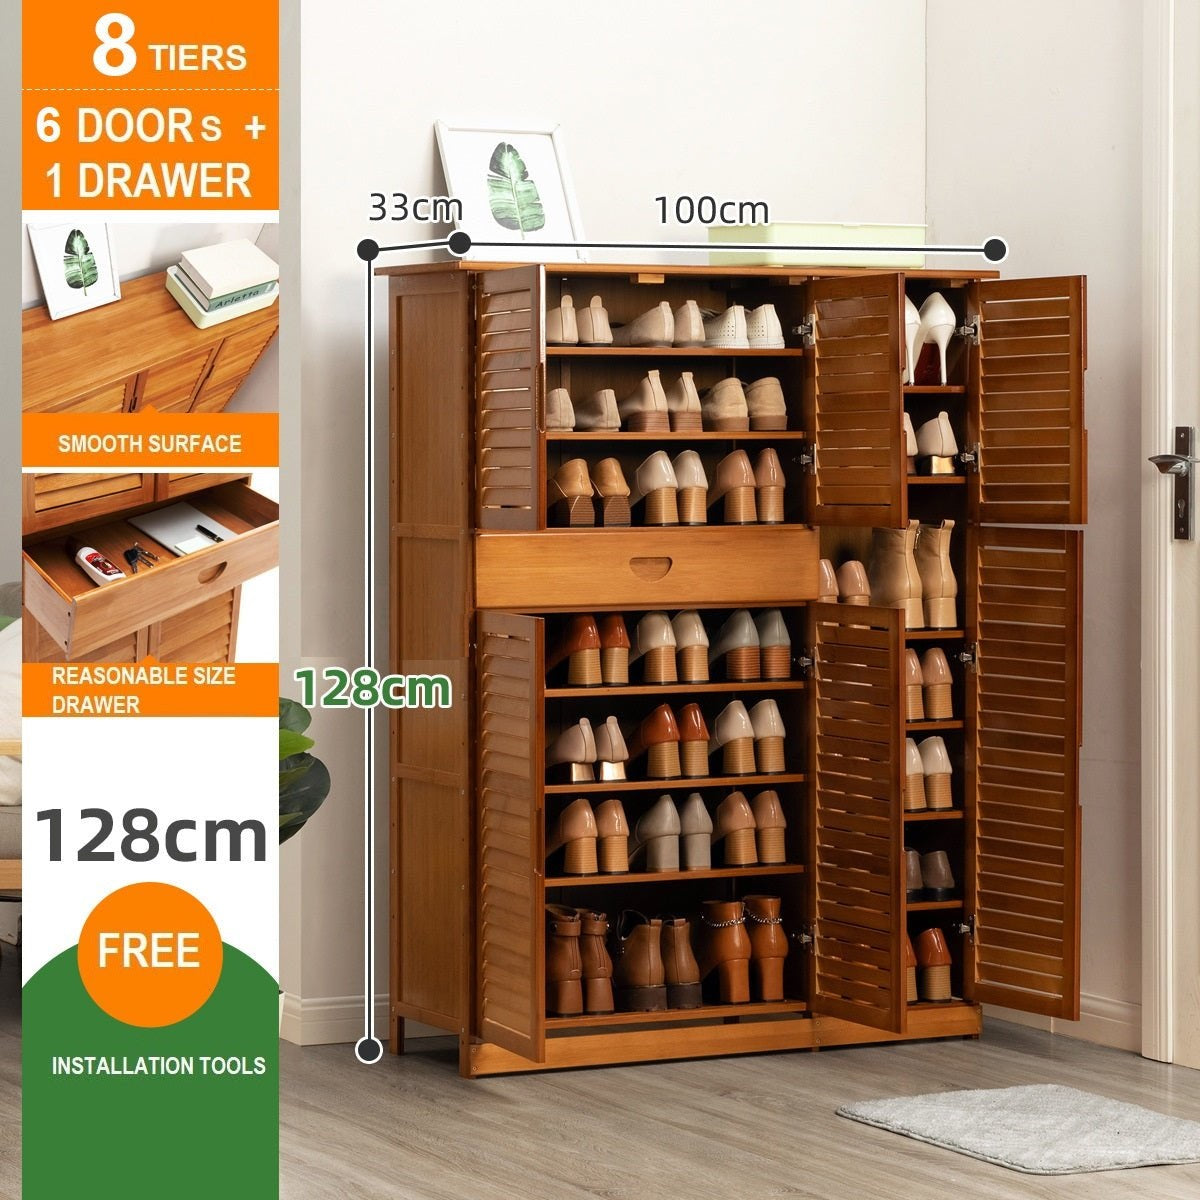 Lecoi 8 Tier & 4 Doors Bamboo Shoe Rack Cabinet with 1 Drawer - Natural - Notbrand